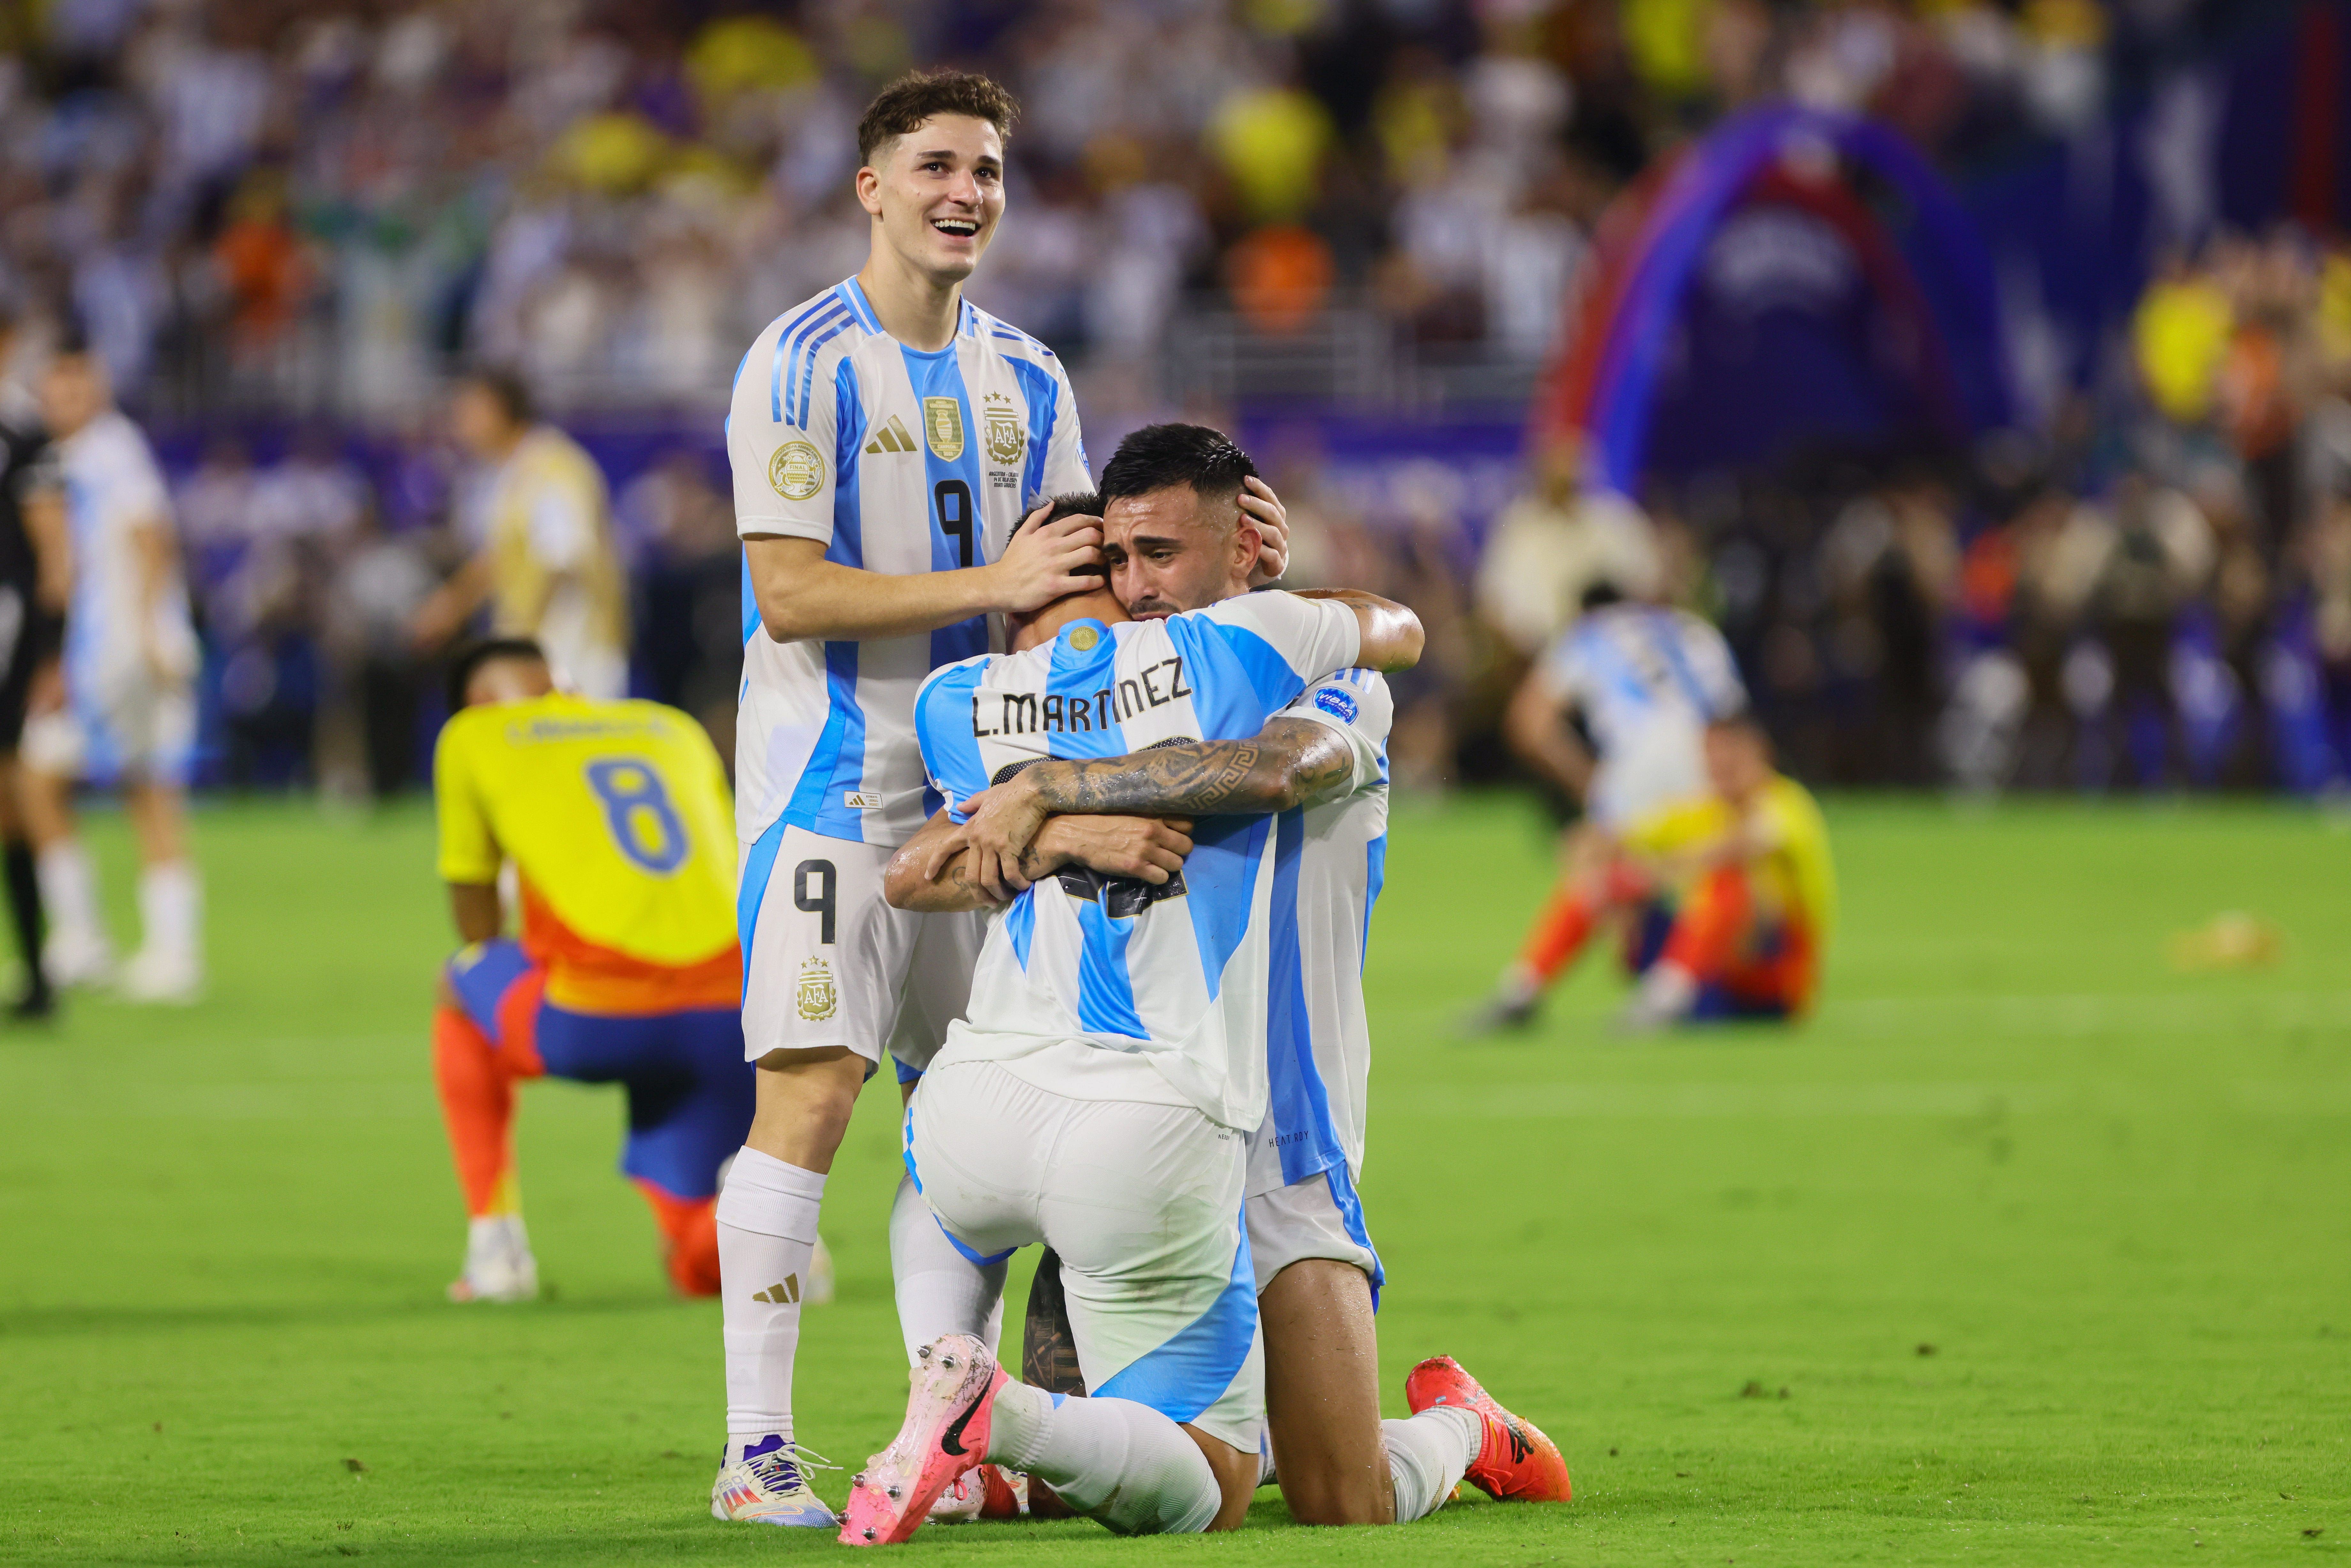 Copa America final: Who scored the winning goal for Argentina after Lionel Messi injury?